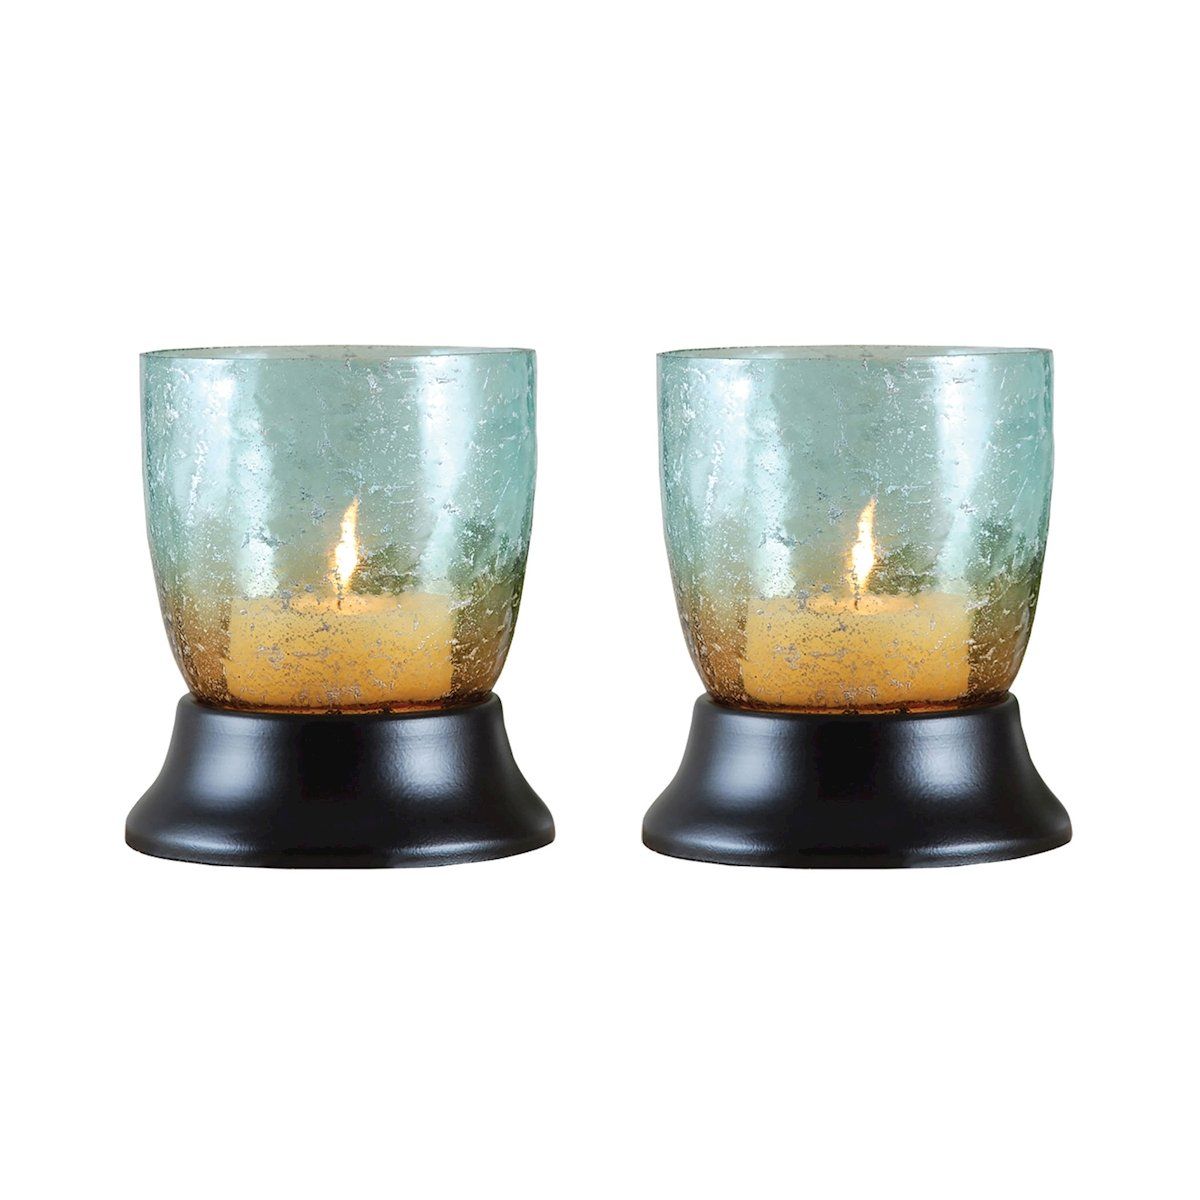 Pacifica Set of 2 Small Pillar Holders Accessories Pomeroy 